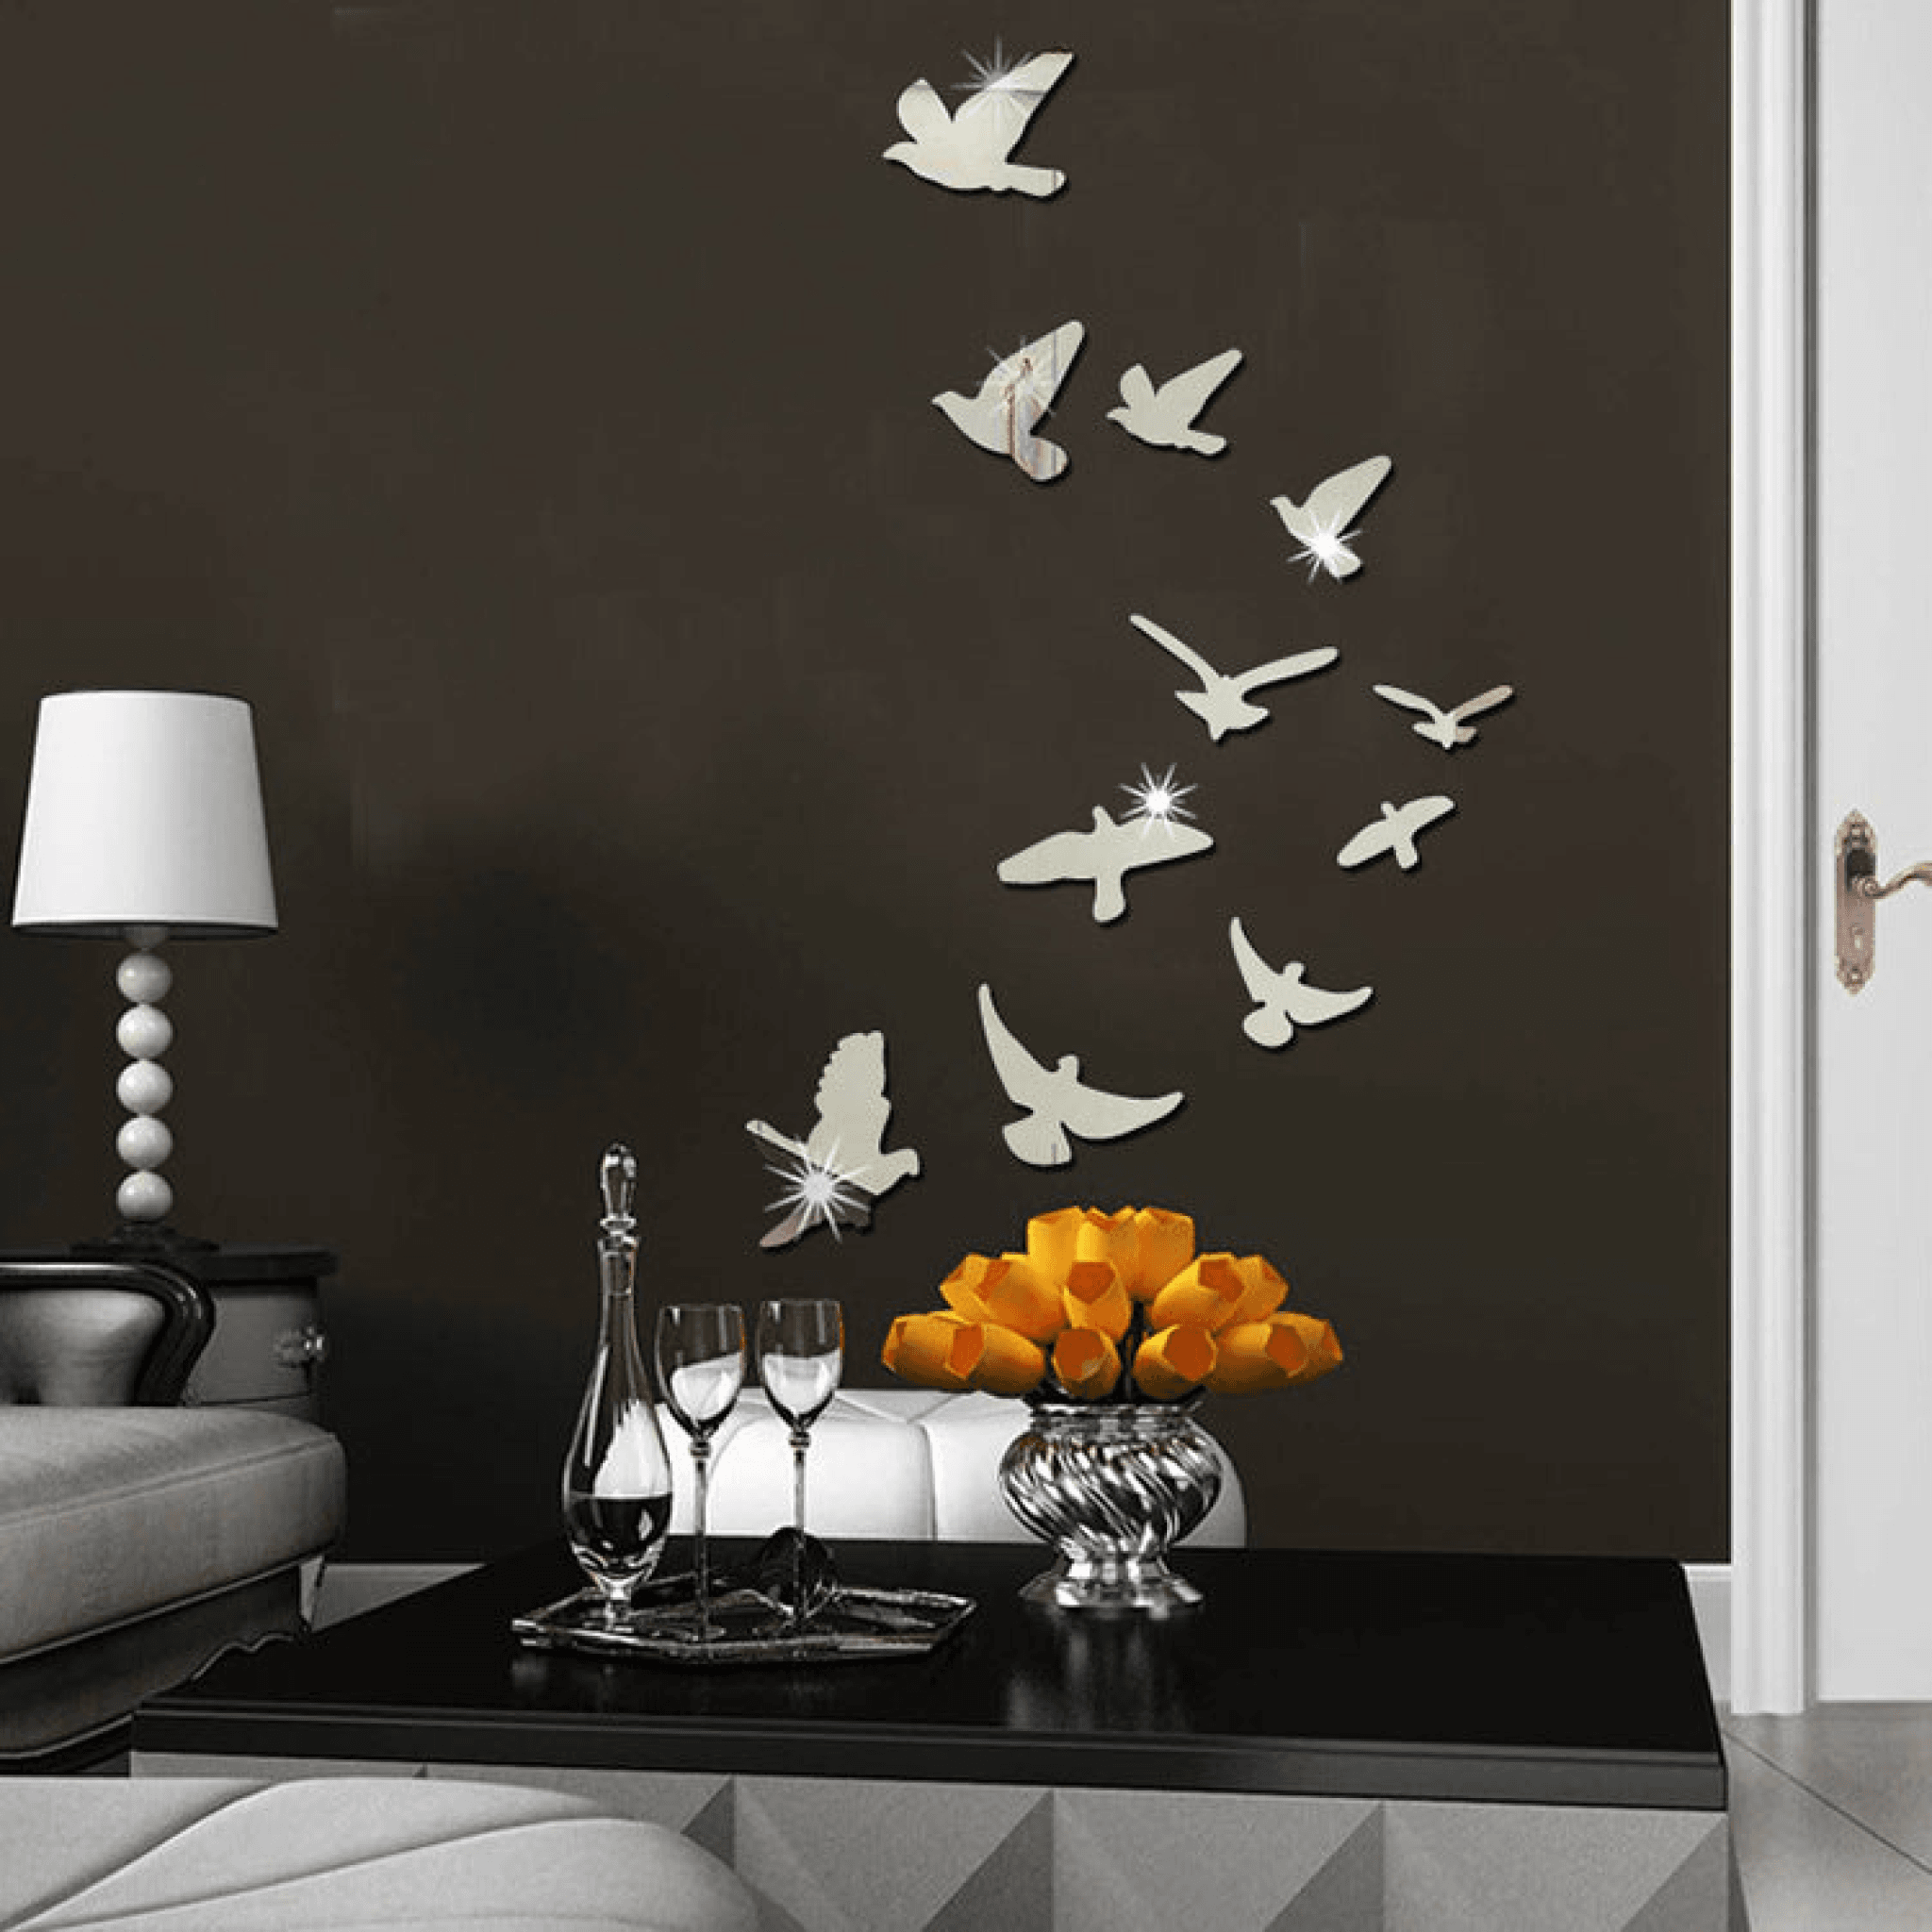 11 pcs Creative Flock Birds 3D Acrylic Mirror Stickers for Wall – Accent  Collection